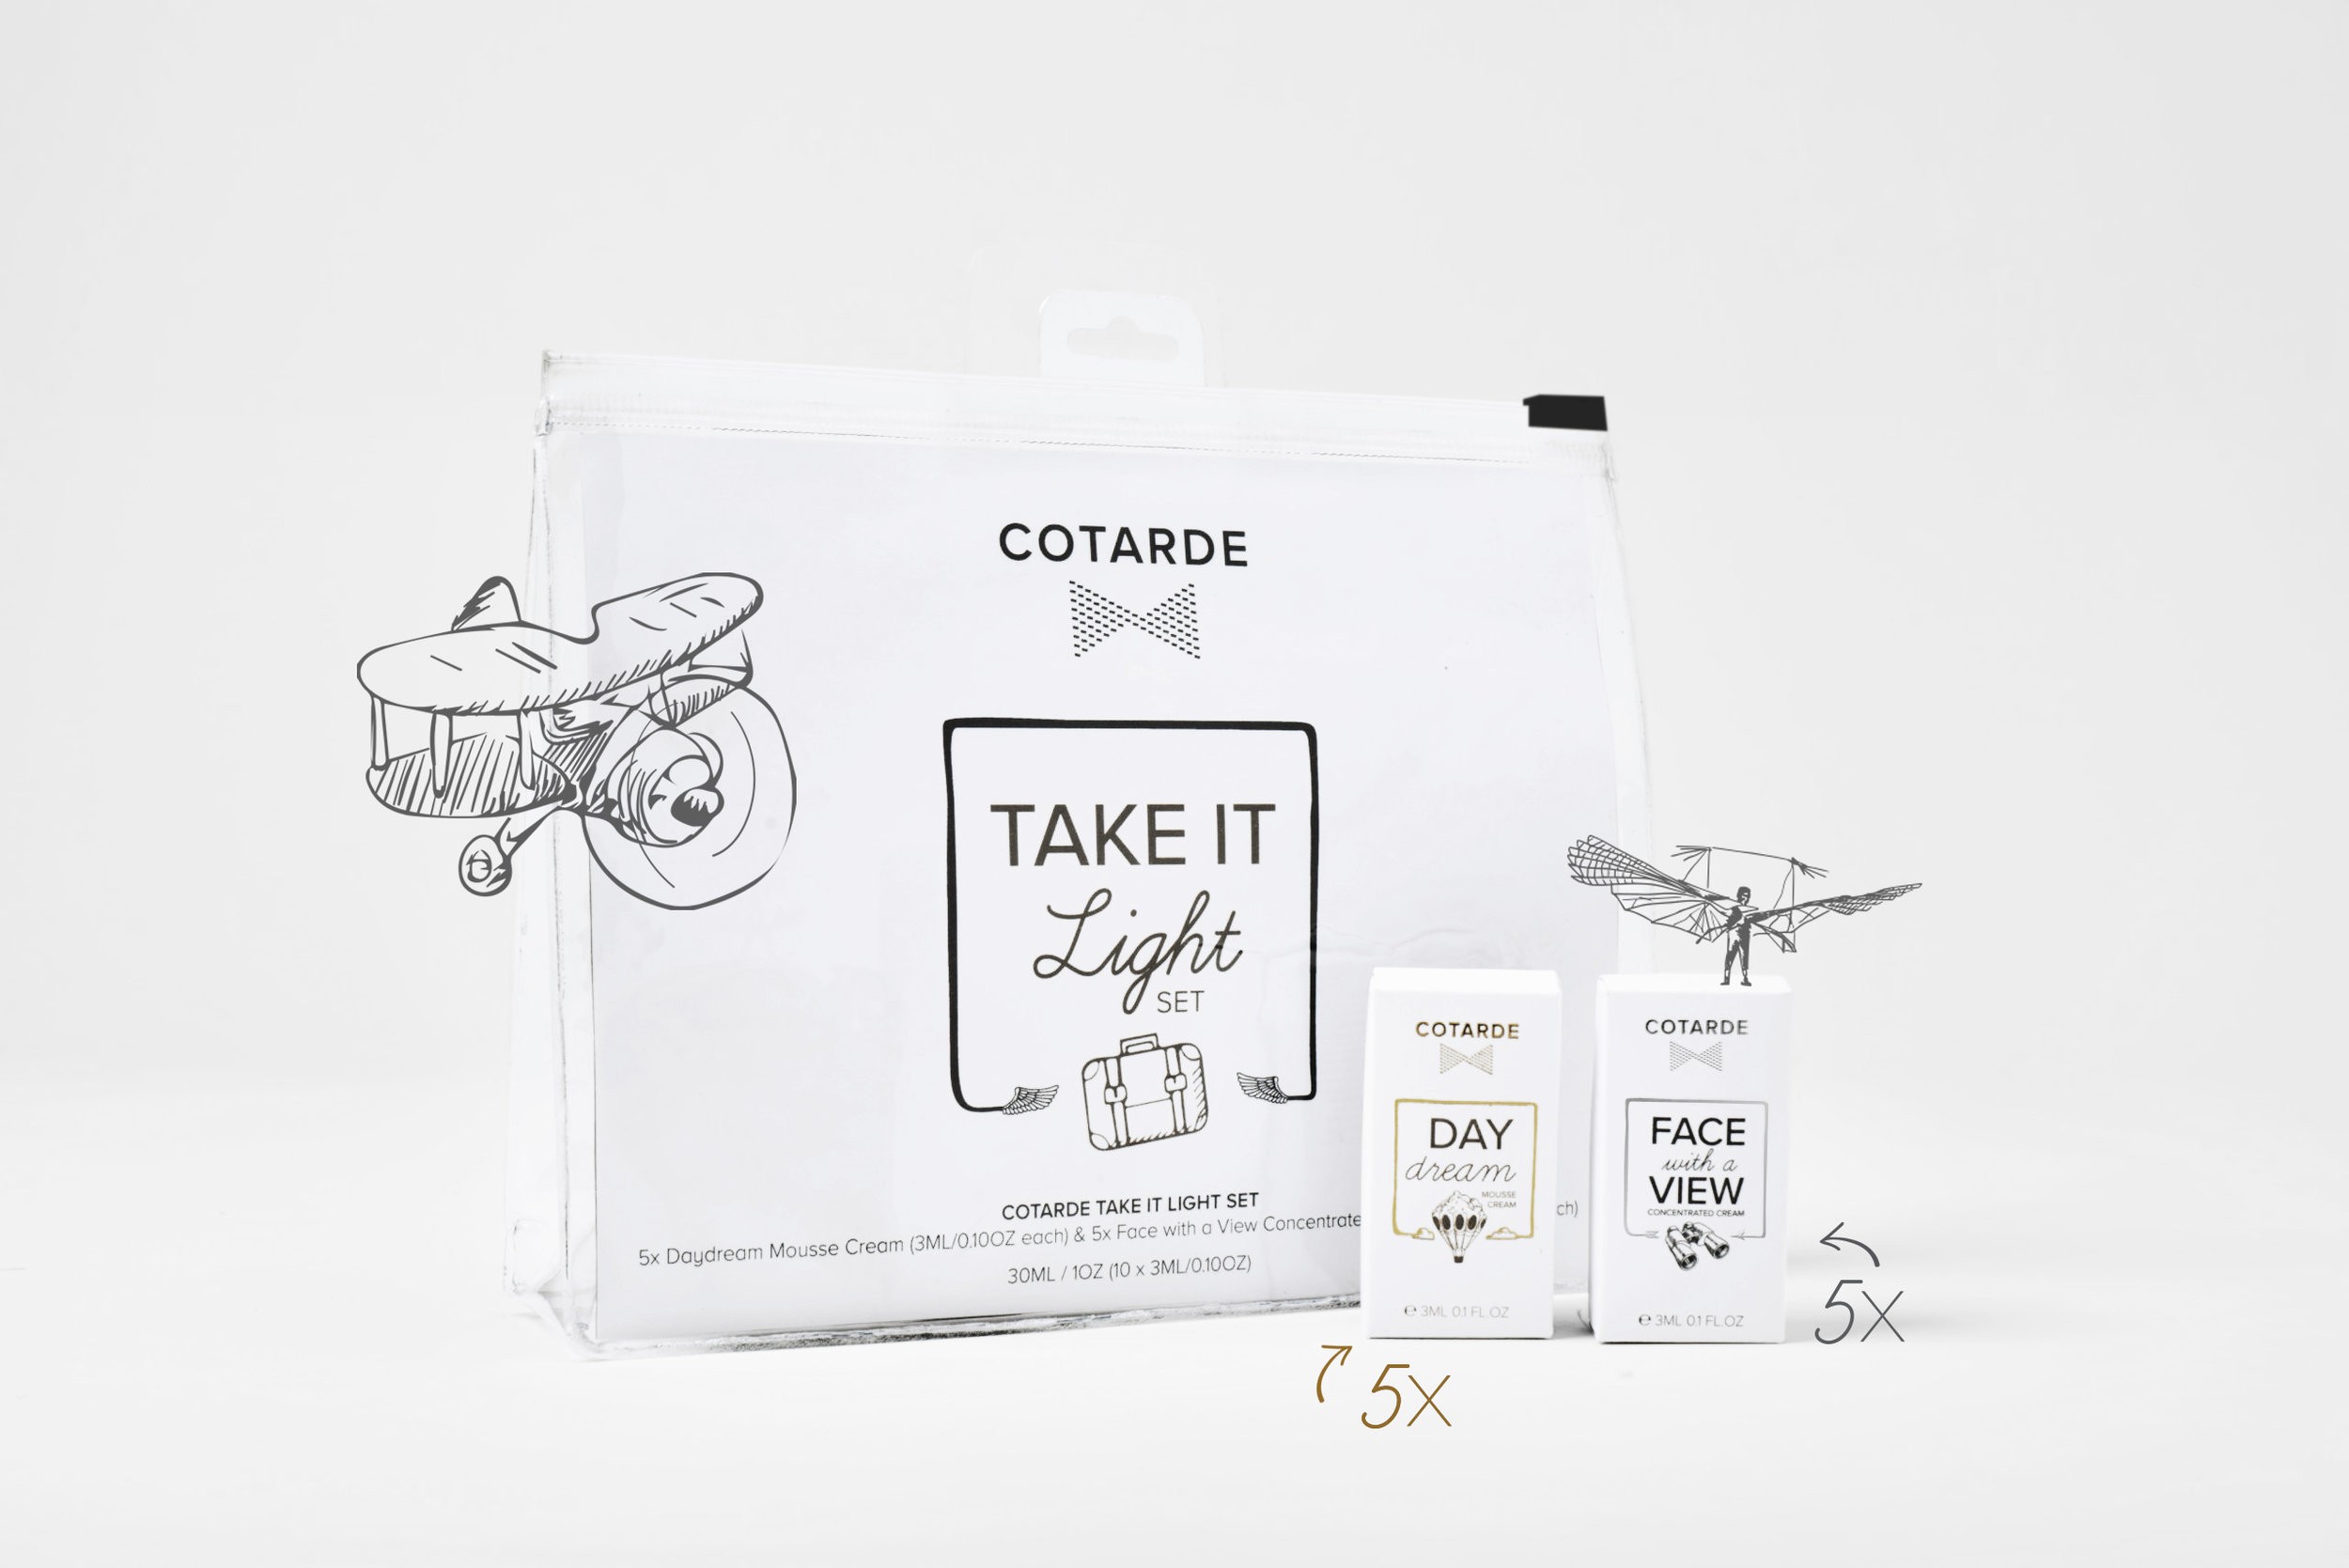 Brand and Packaging Design for the World’s First Skincare for Jet Setters and Active Life-stylers